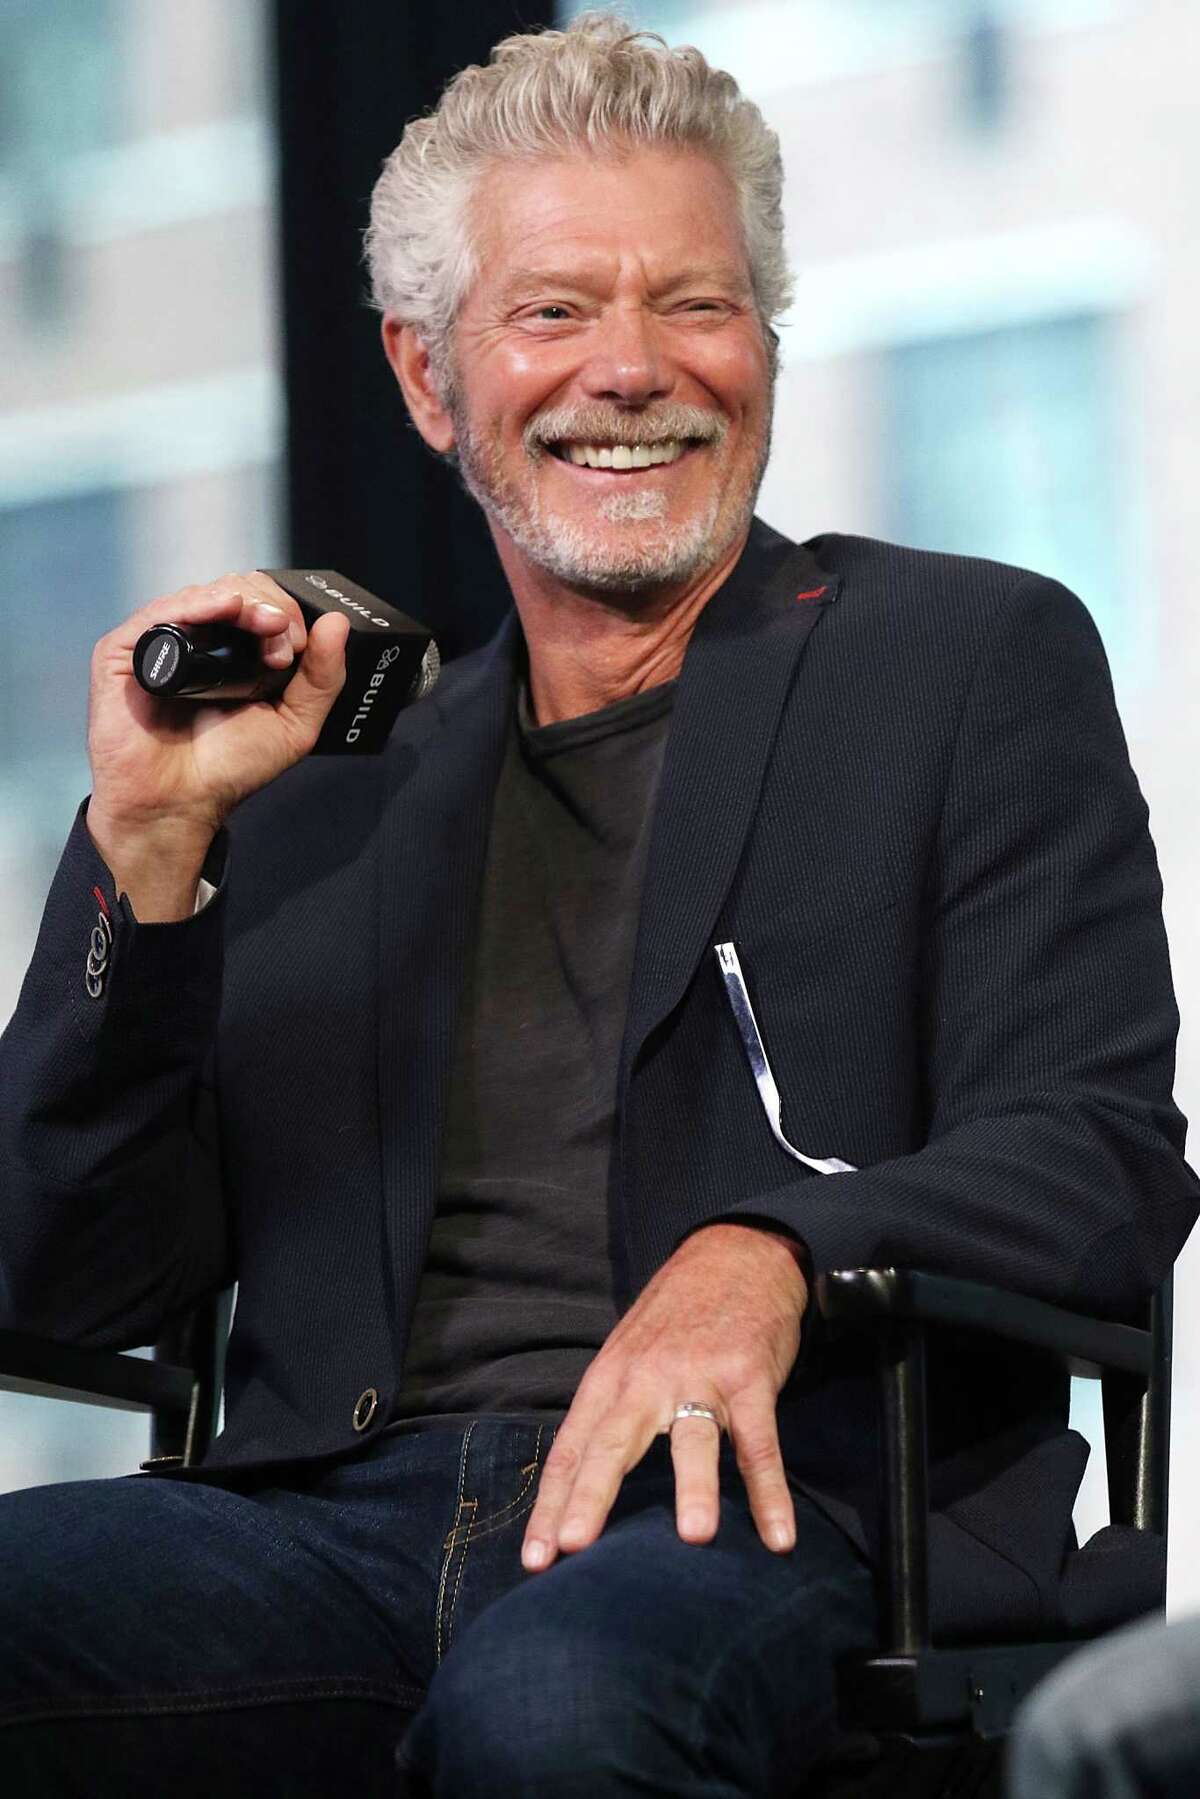 NEW YORK, NY - AUGUST 09: Stephen Lang attends AOL Build Presents Actor/Writer Stephen Lang to discuss "Beyond Glory" and "Don't Breathe" at AOL HQ on August 9, 2016 in New York City. (Photo by Laura Cavanaugh/FilmMagic)